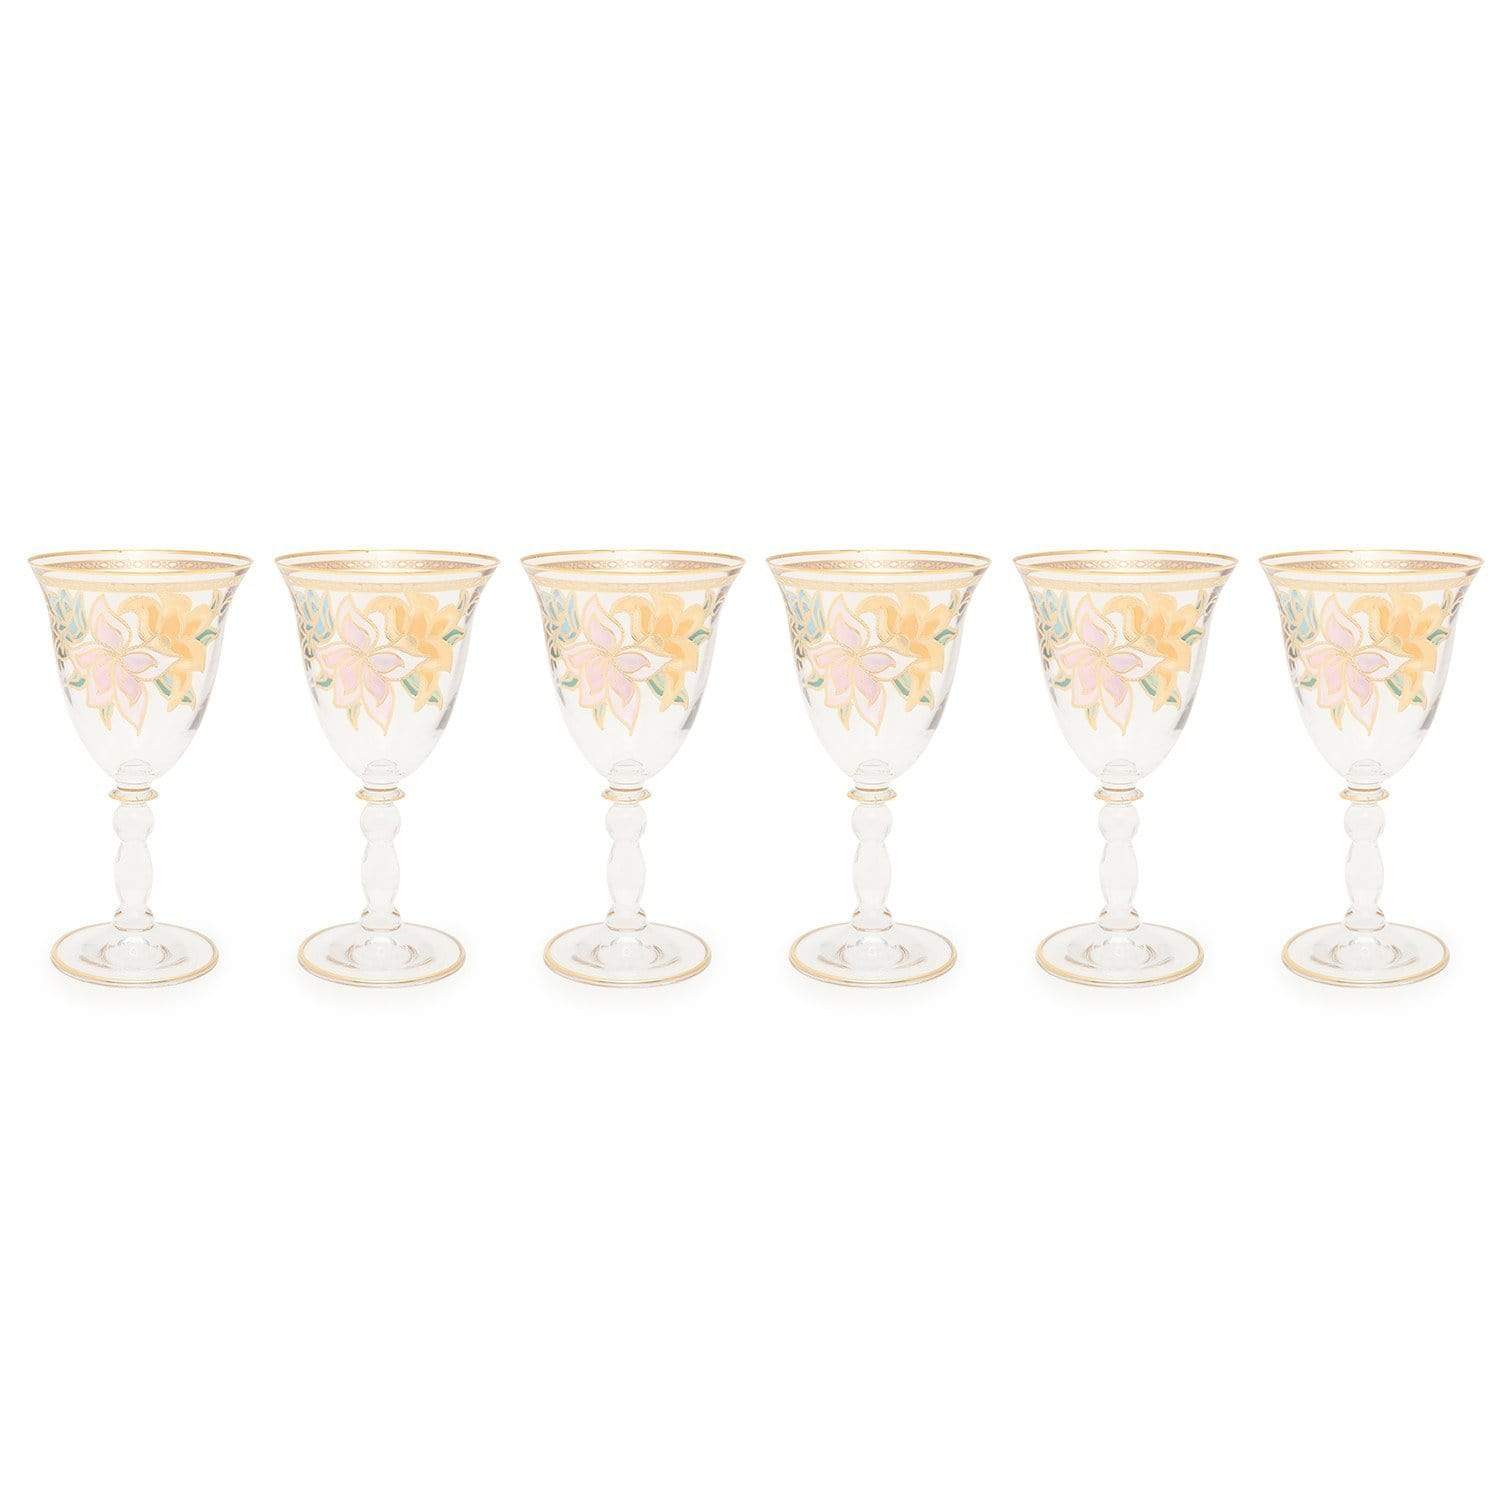 Combi Givy Goblet Set - Gold, 260 ml, Large, 6 Piece - G611Z/96 - Jashanmal Home